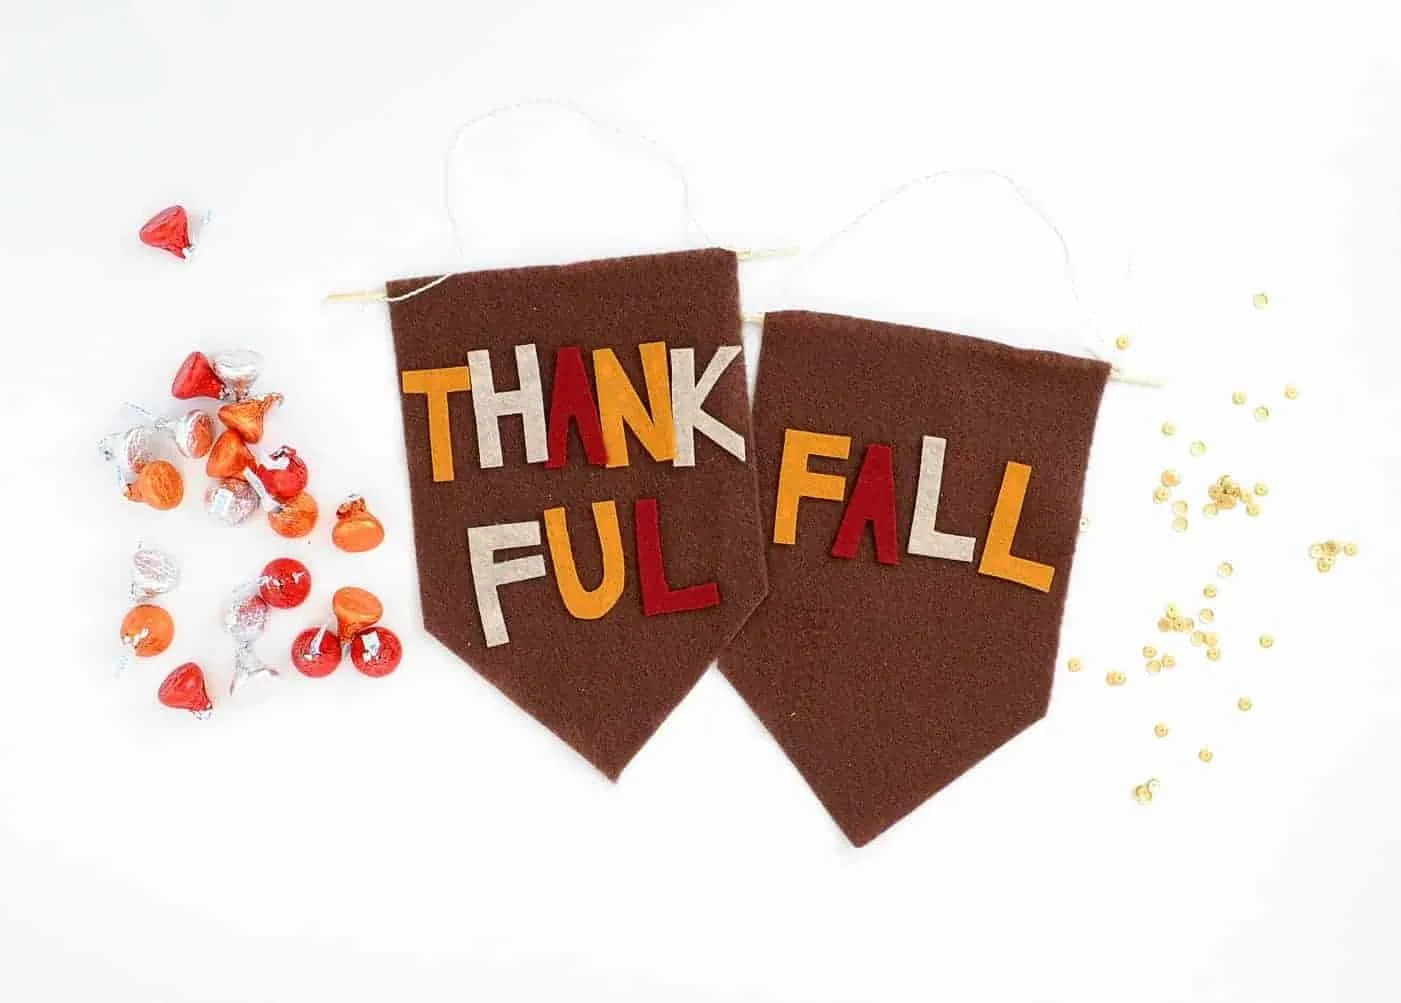 Thankful Fall banner next to orange and red candies.